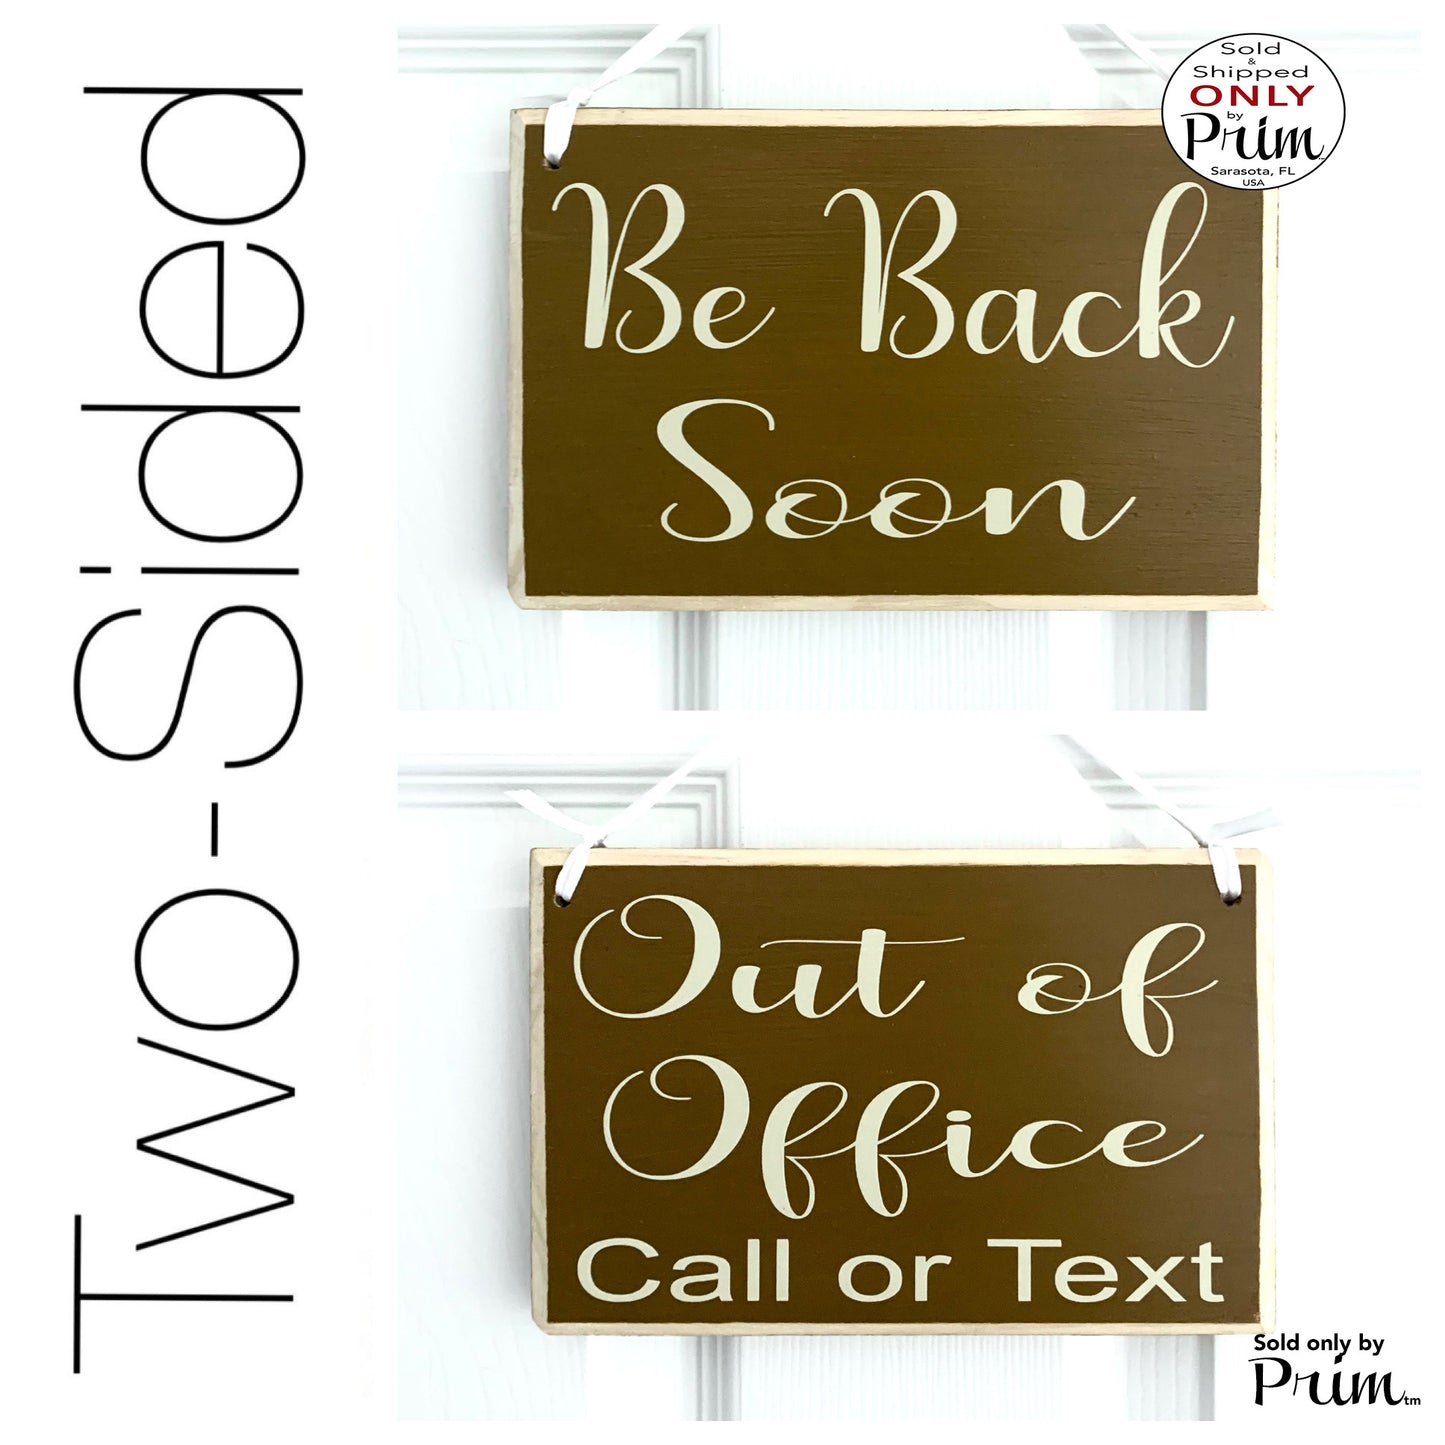 Designs by Prim Two Sided 8x6 Be Back Soon Out of Office Call or Text Custom Wood Sign | Welcome Please Knock Be Back Shortly Sorry We Missed You Plaque